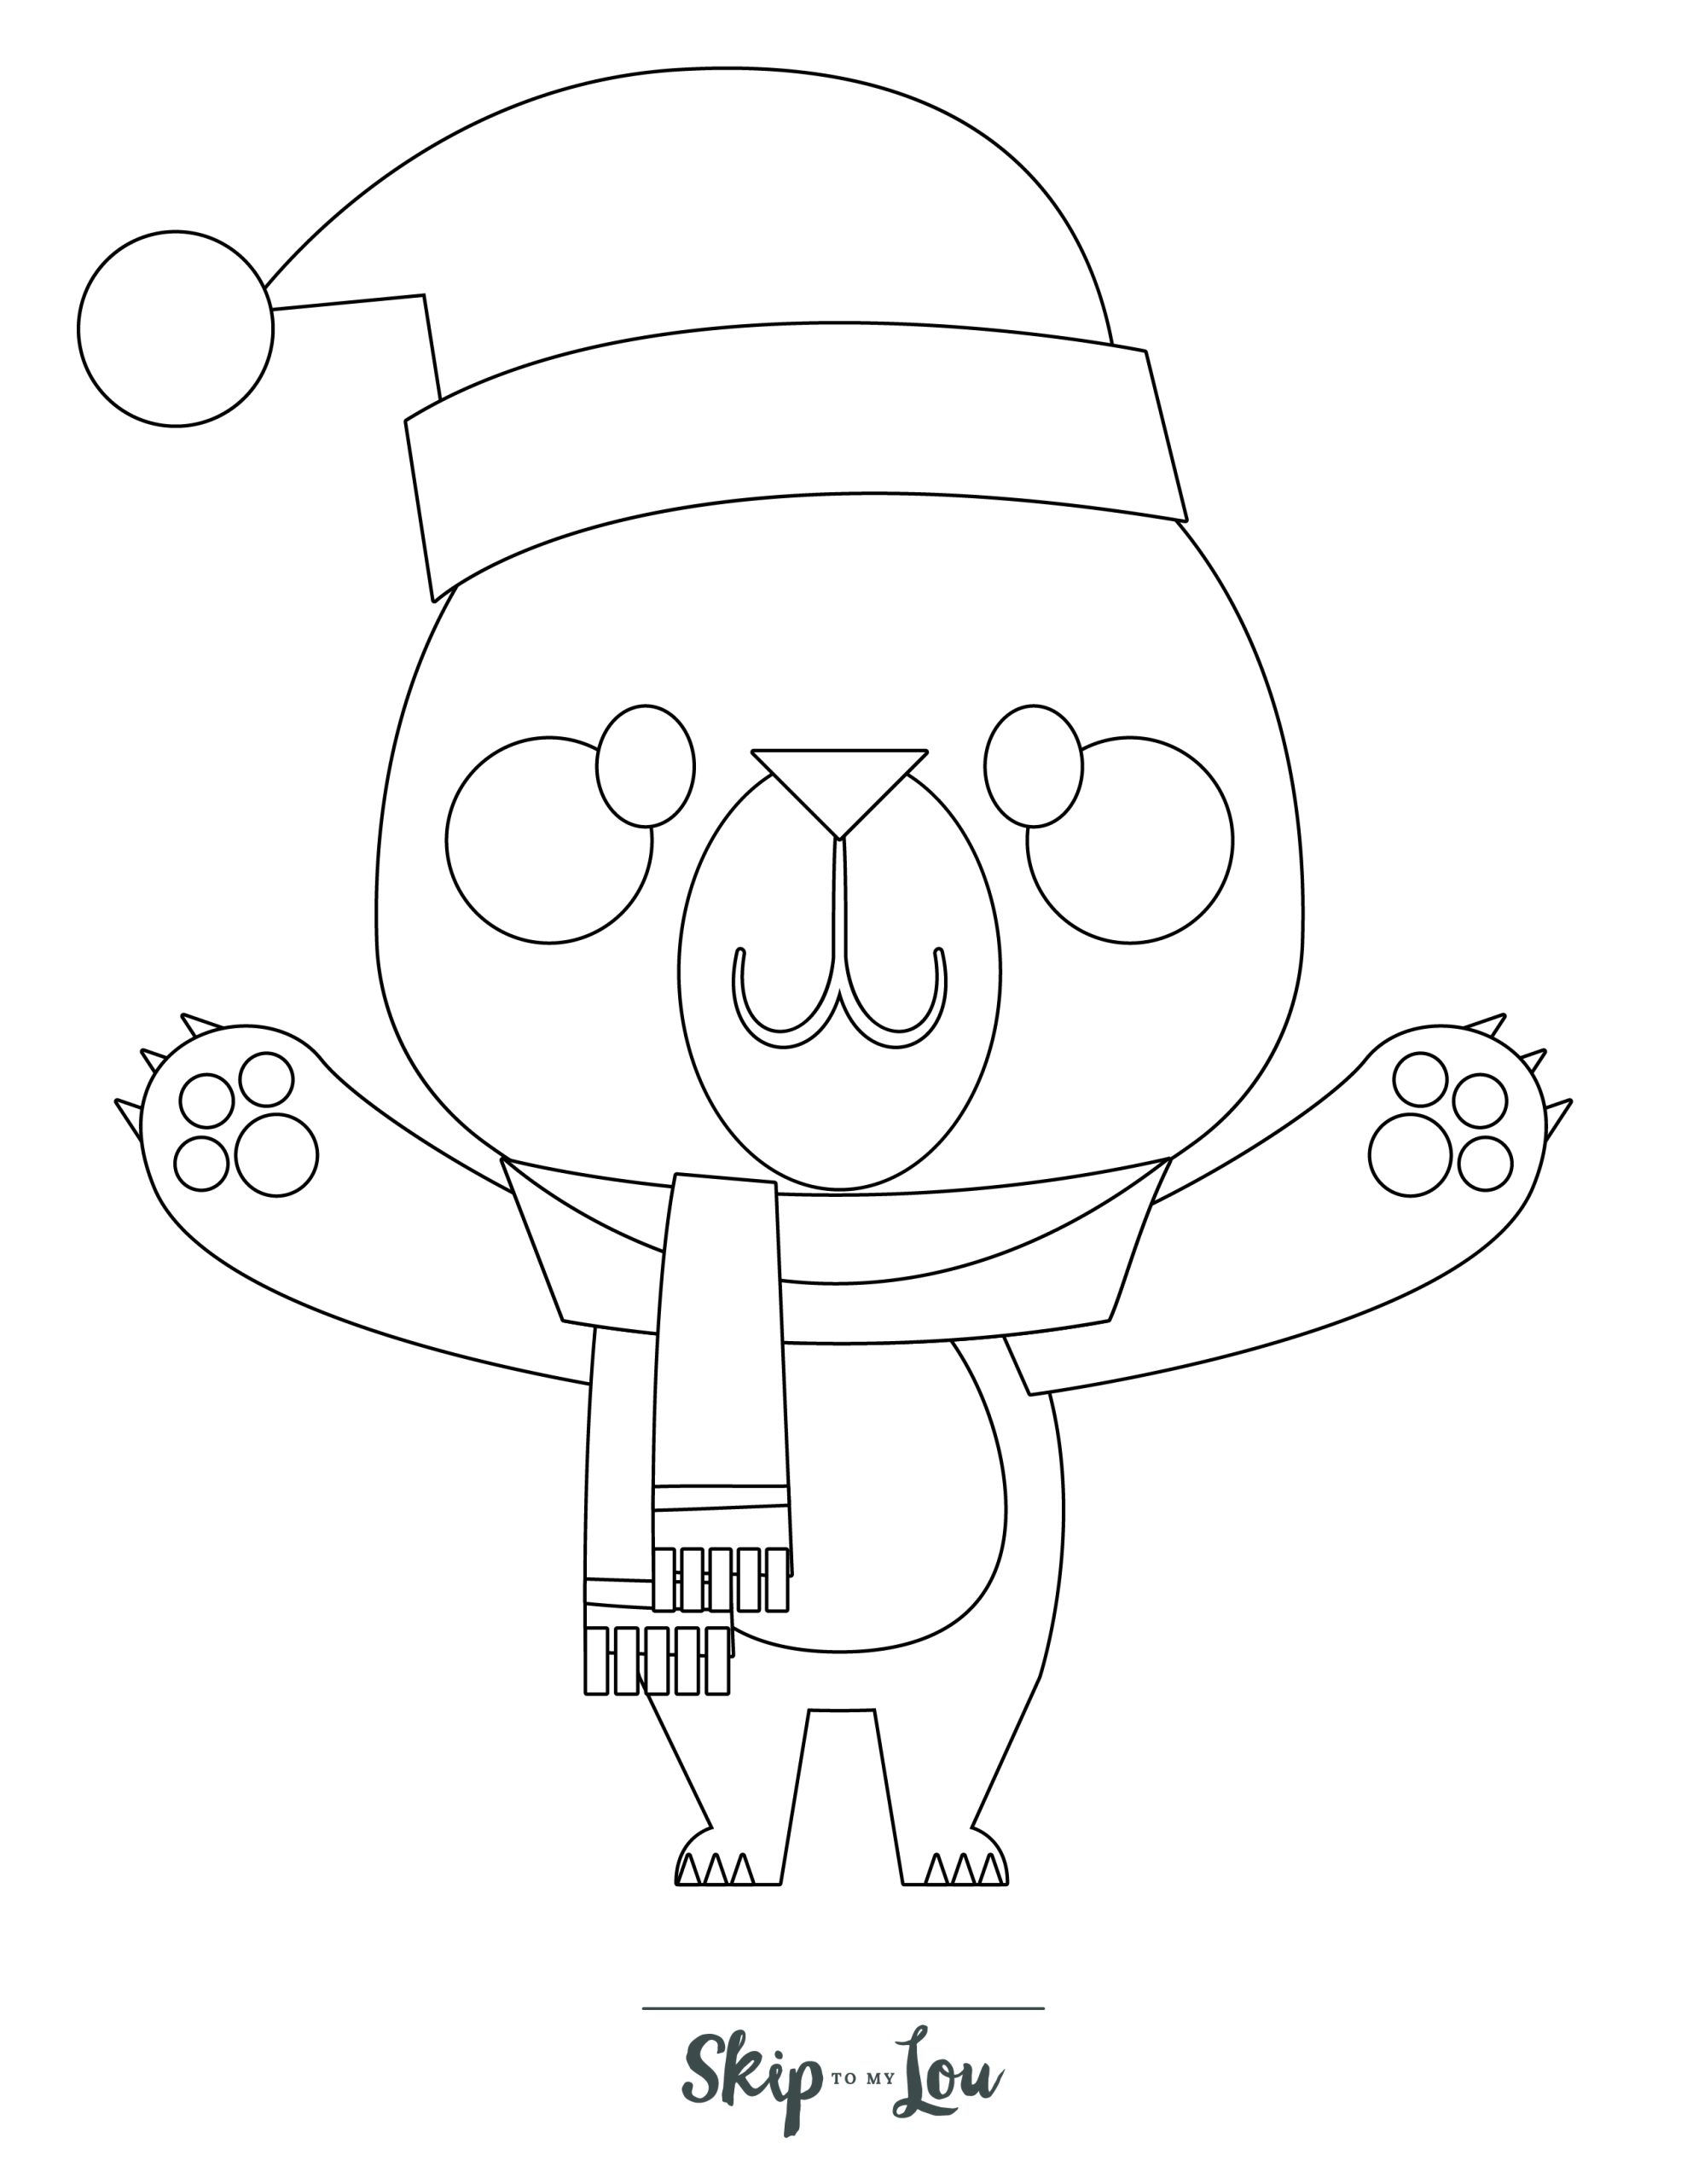 Holiday Coloring Page 12 - Line drawing of a bear with arms out ready for a hug